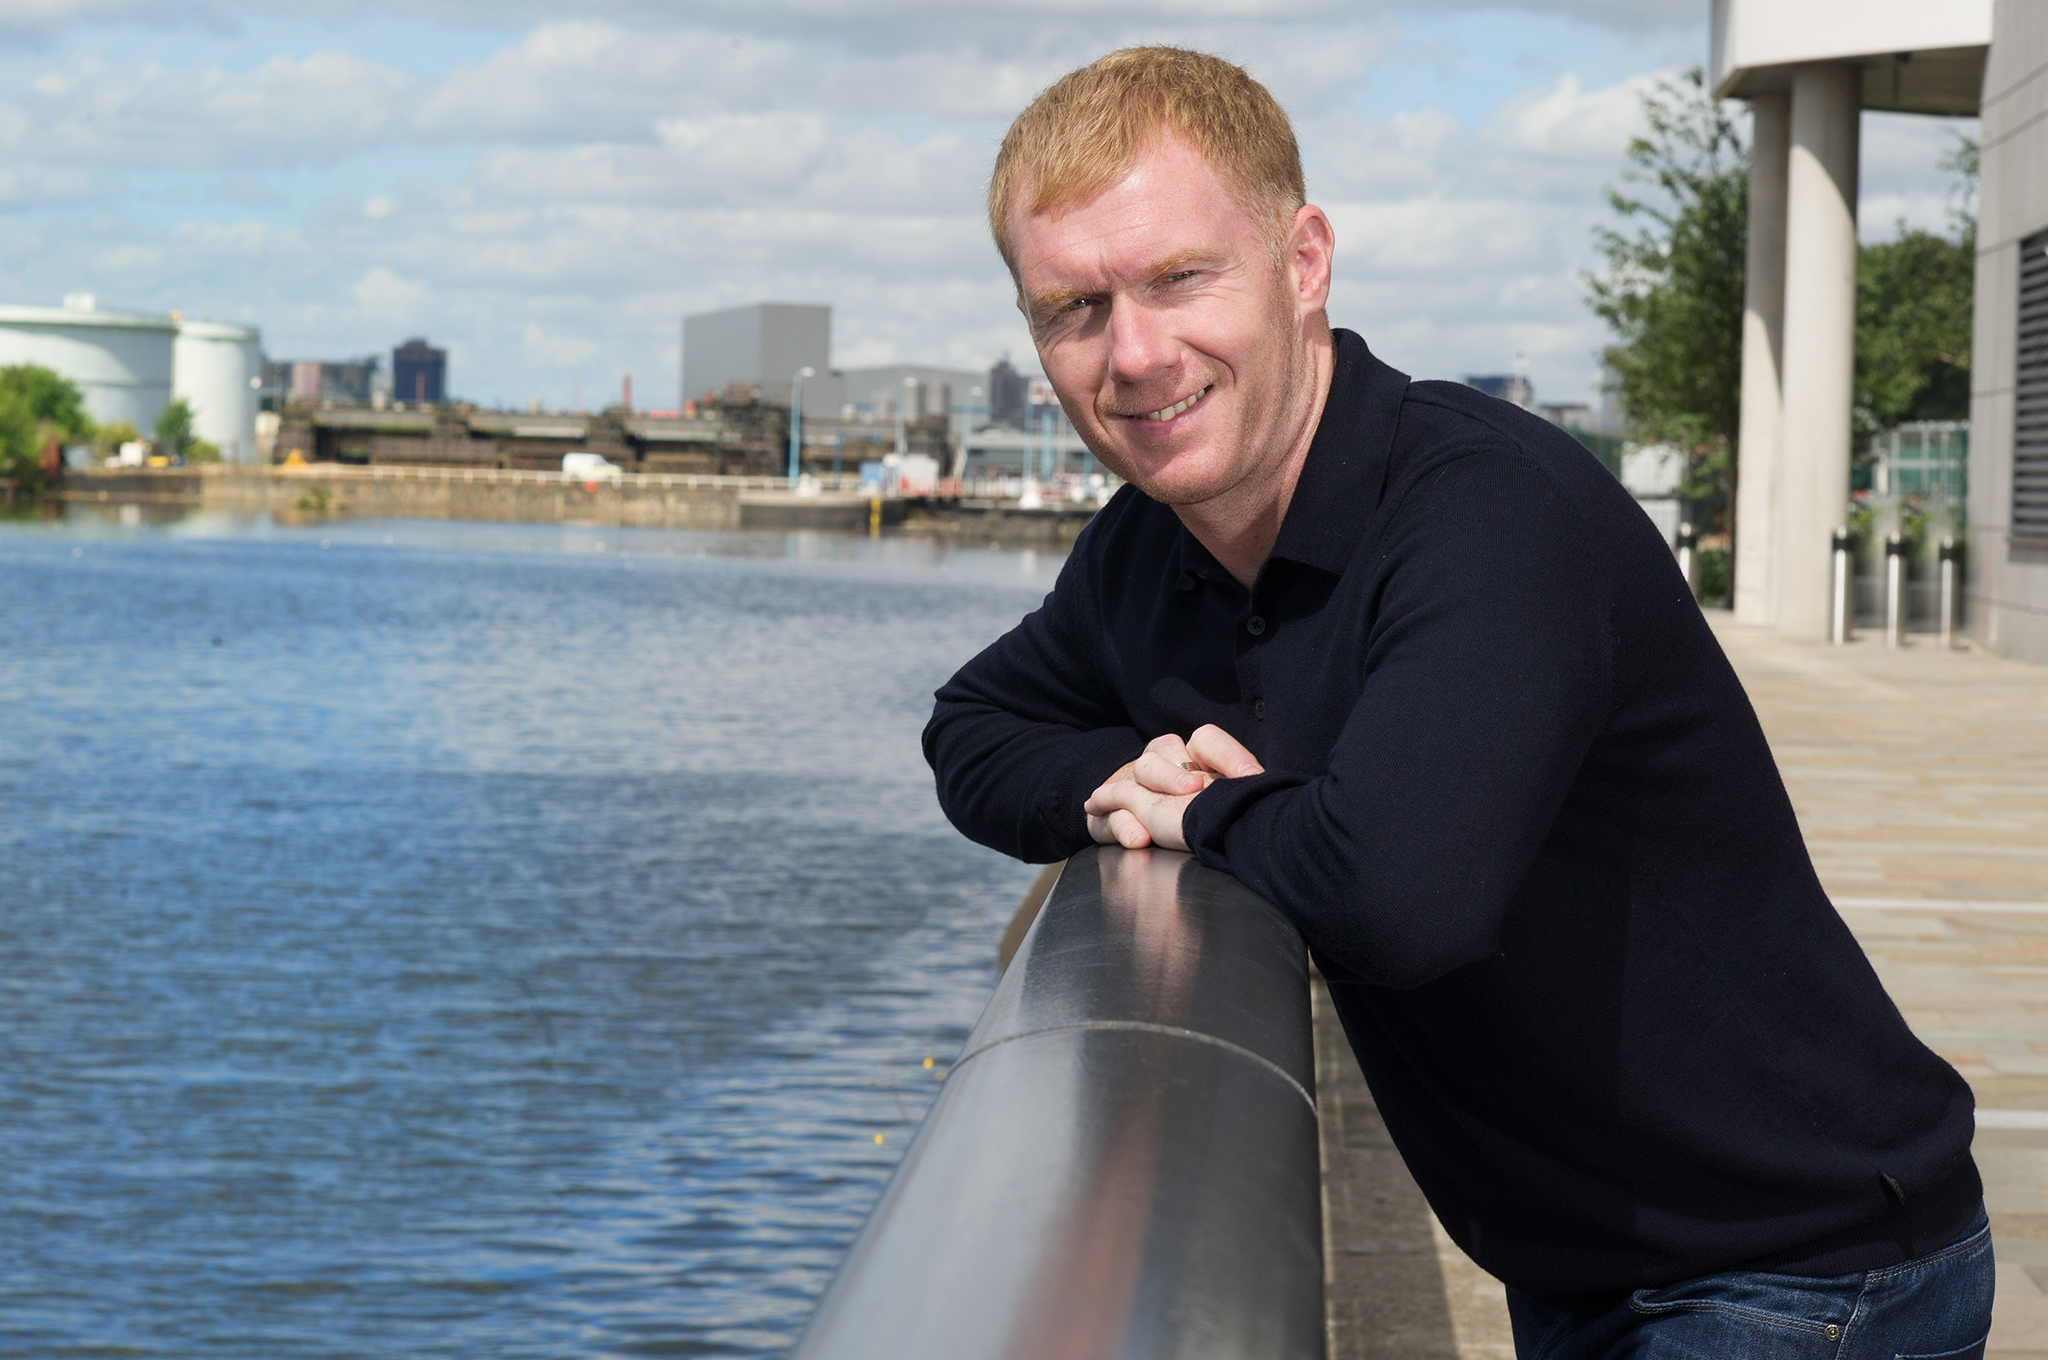 Paul Scholes will write a weekly column for The Independent